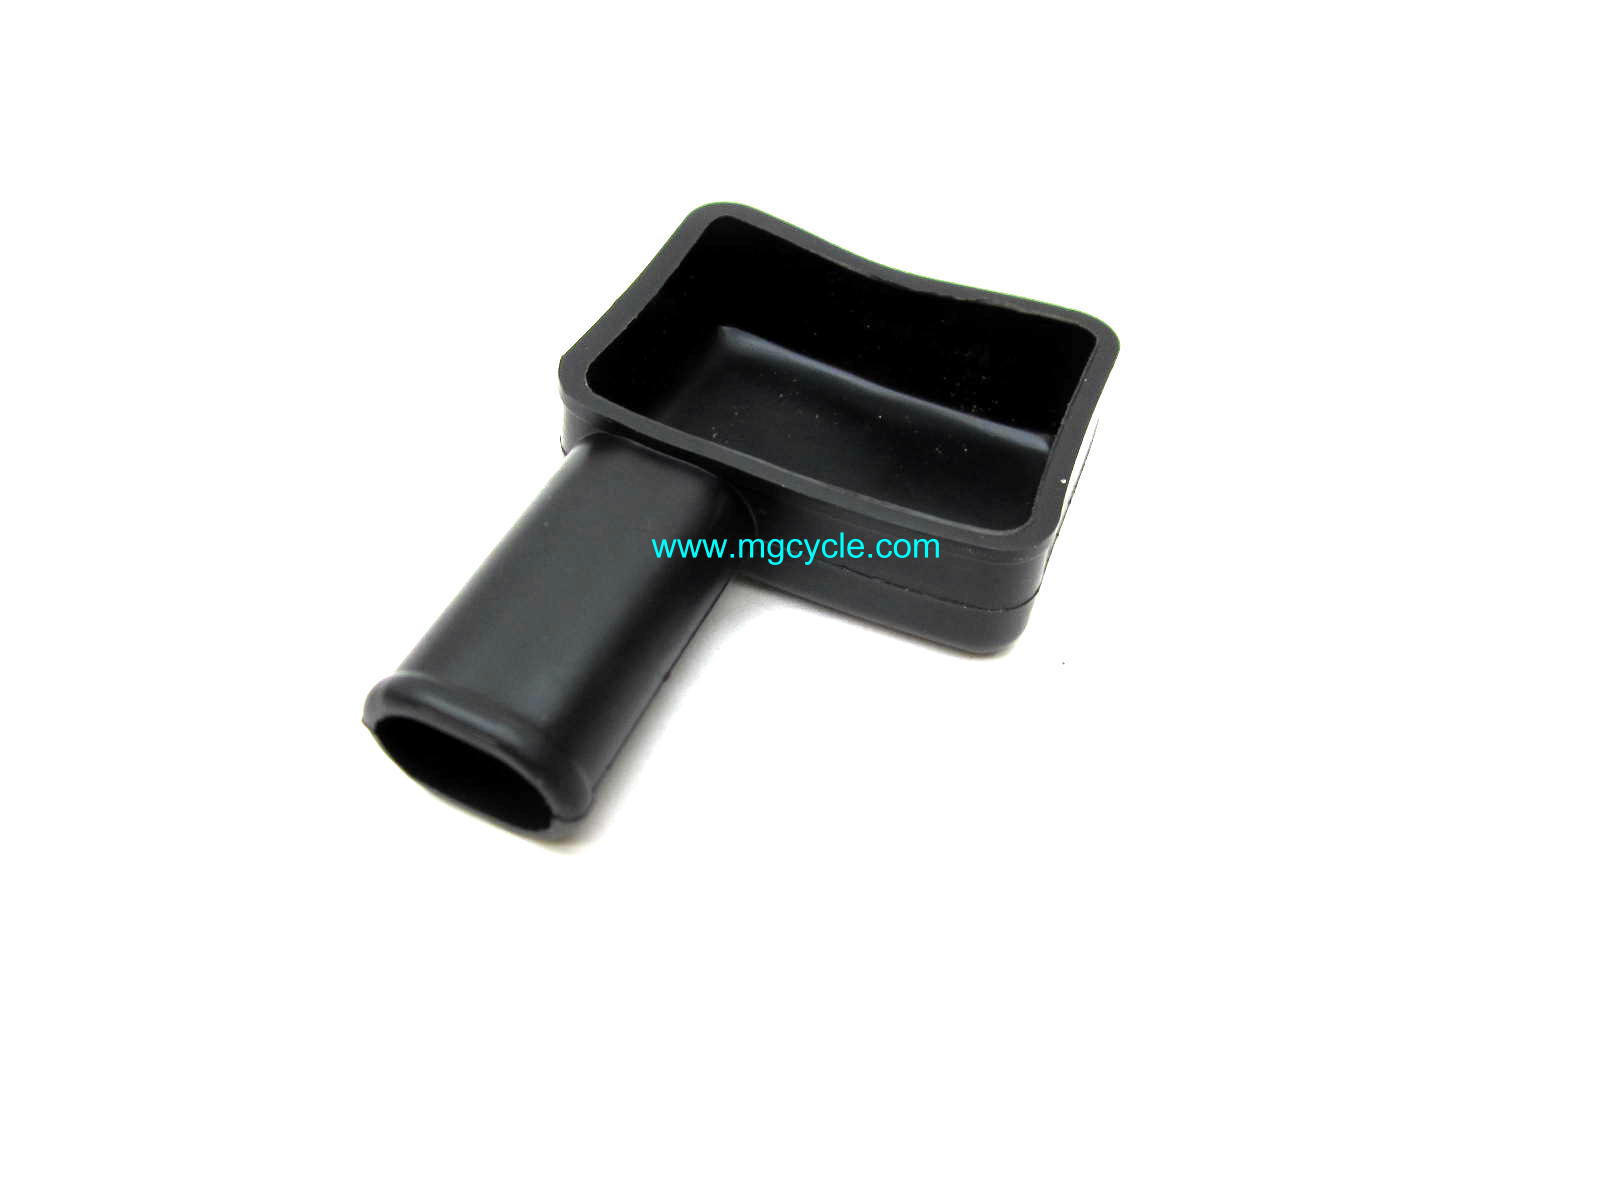 Rectangular rubber boot for battery cable